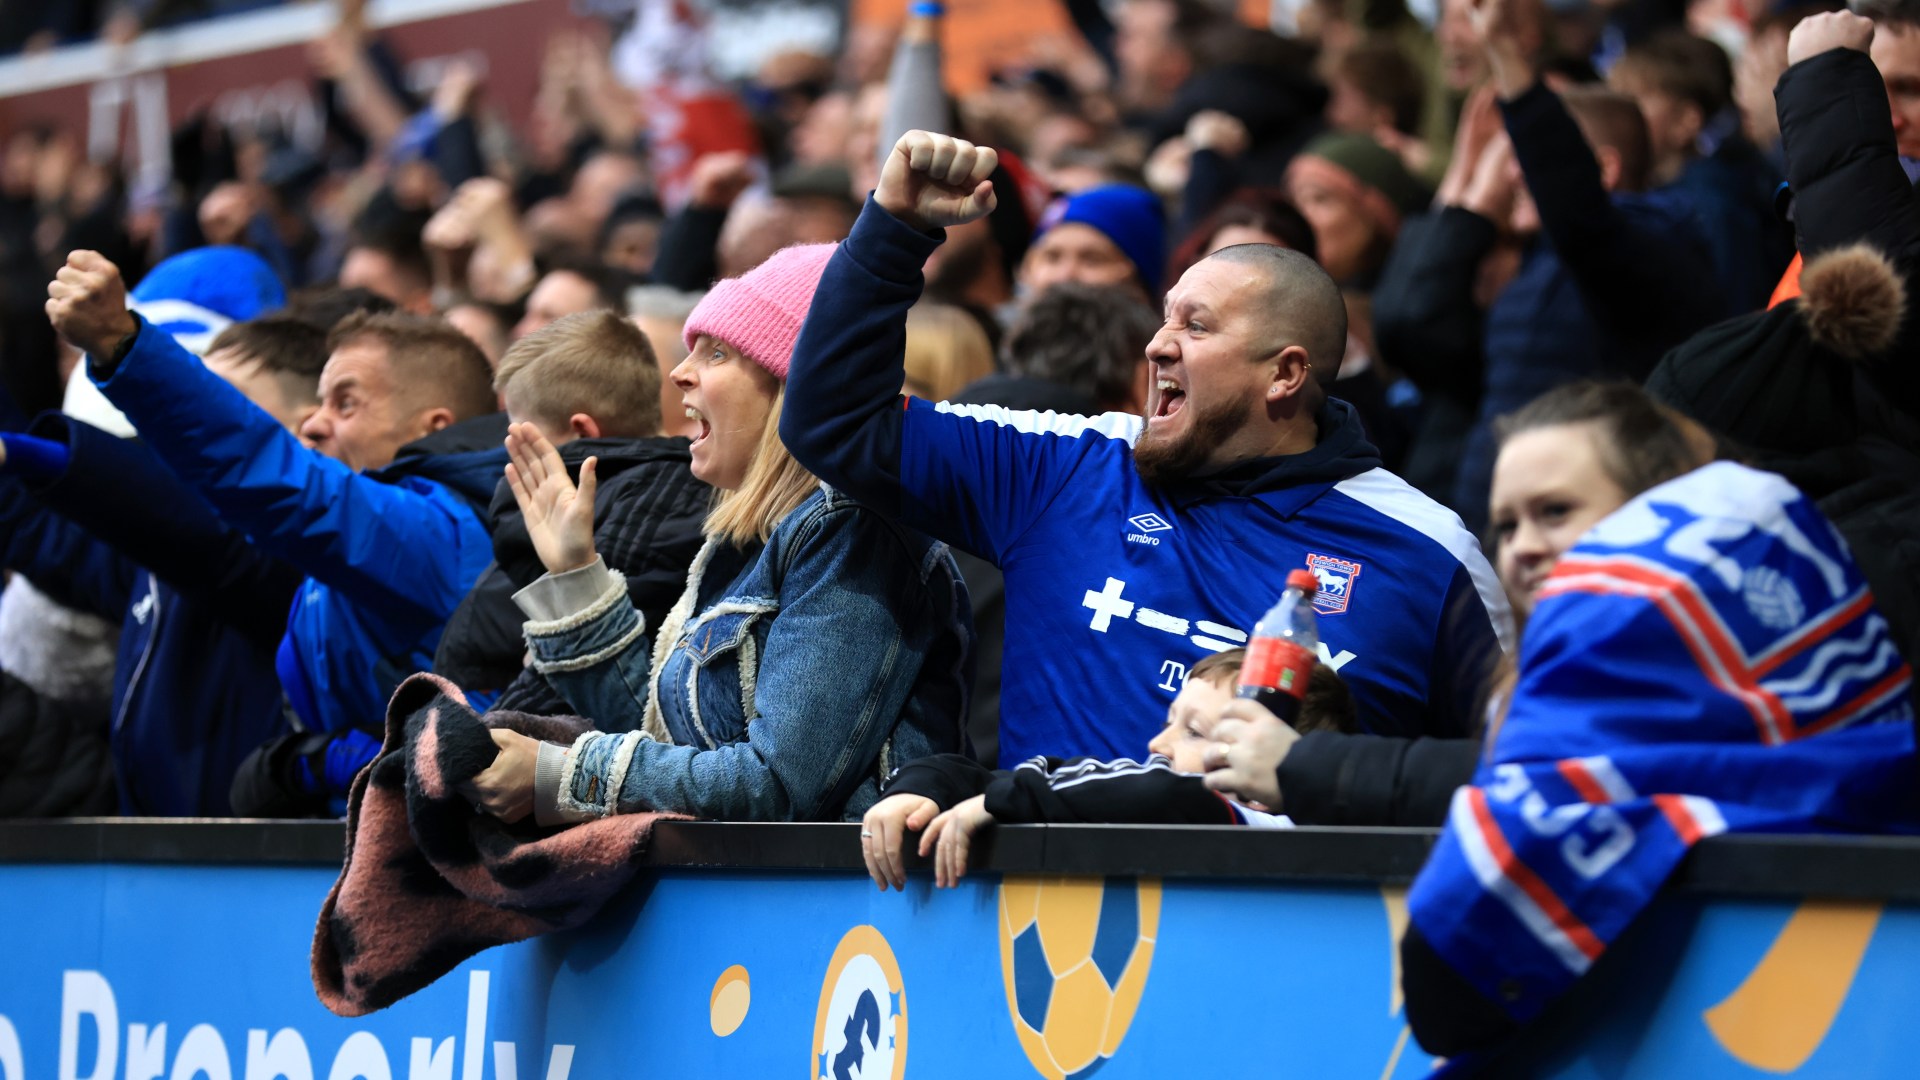 Ipswich fans all say the same thing about Chelsea starlet as club secure lucrative investment from American firm [Video]